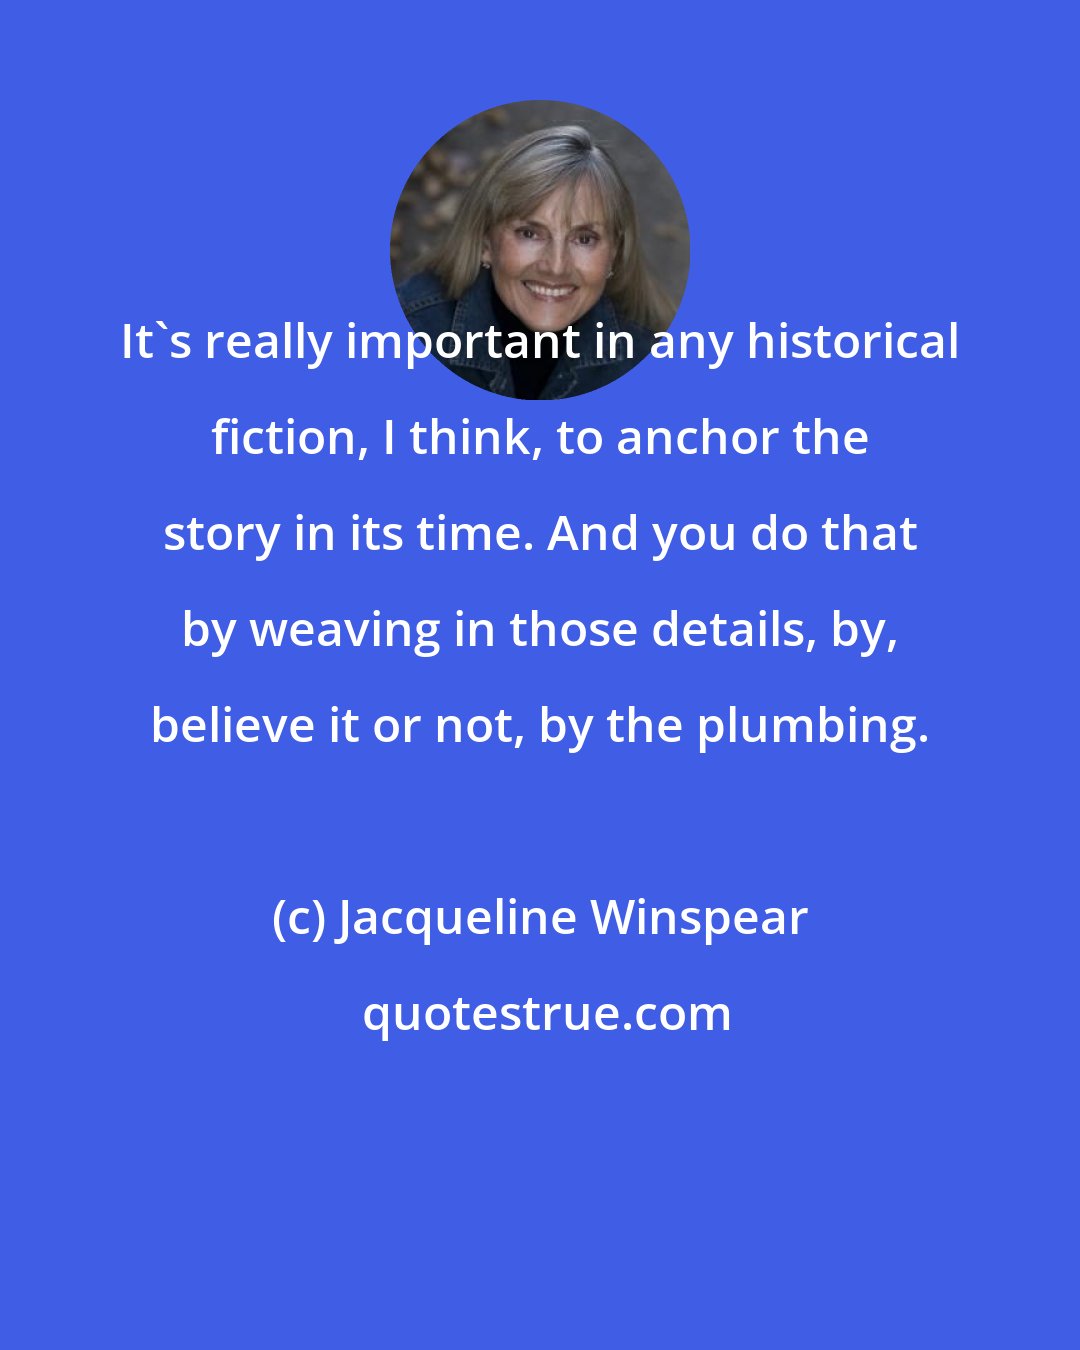 Jacqueline Winspear: It's really important in any historical fiction, I think, to anchor the story in its time. And you do that by weaving in those details, by, believe it or not, by the plumbing.